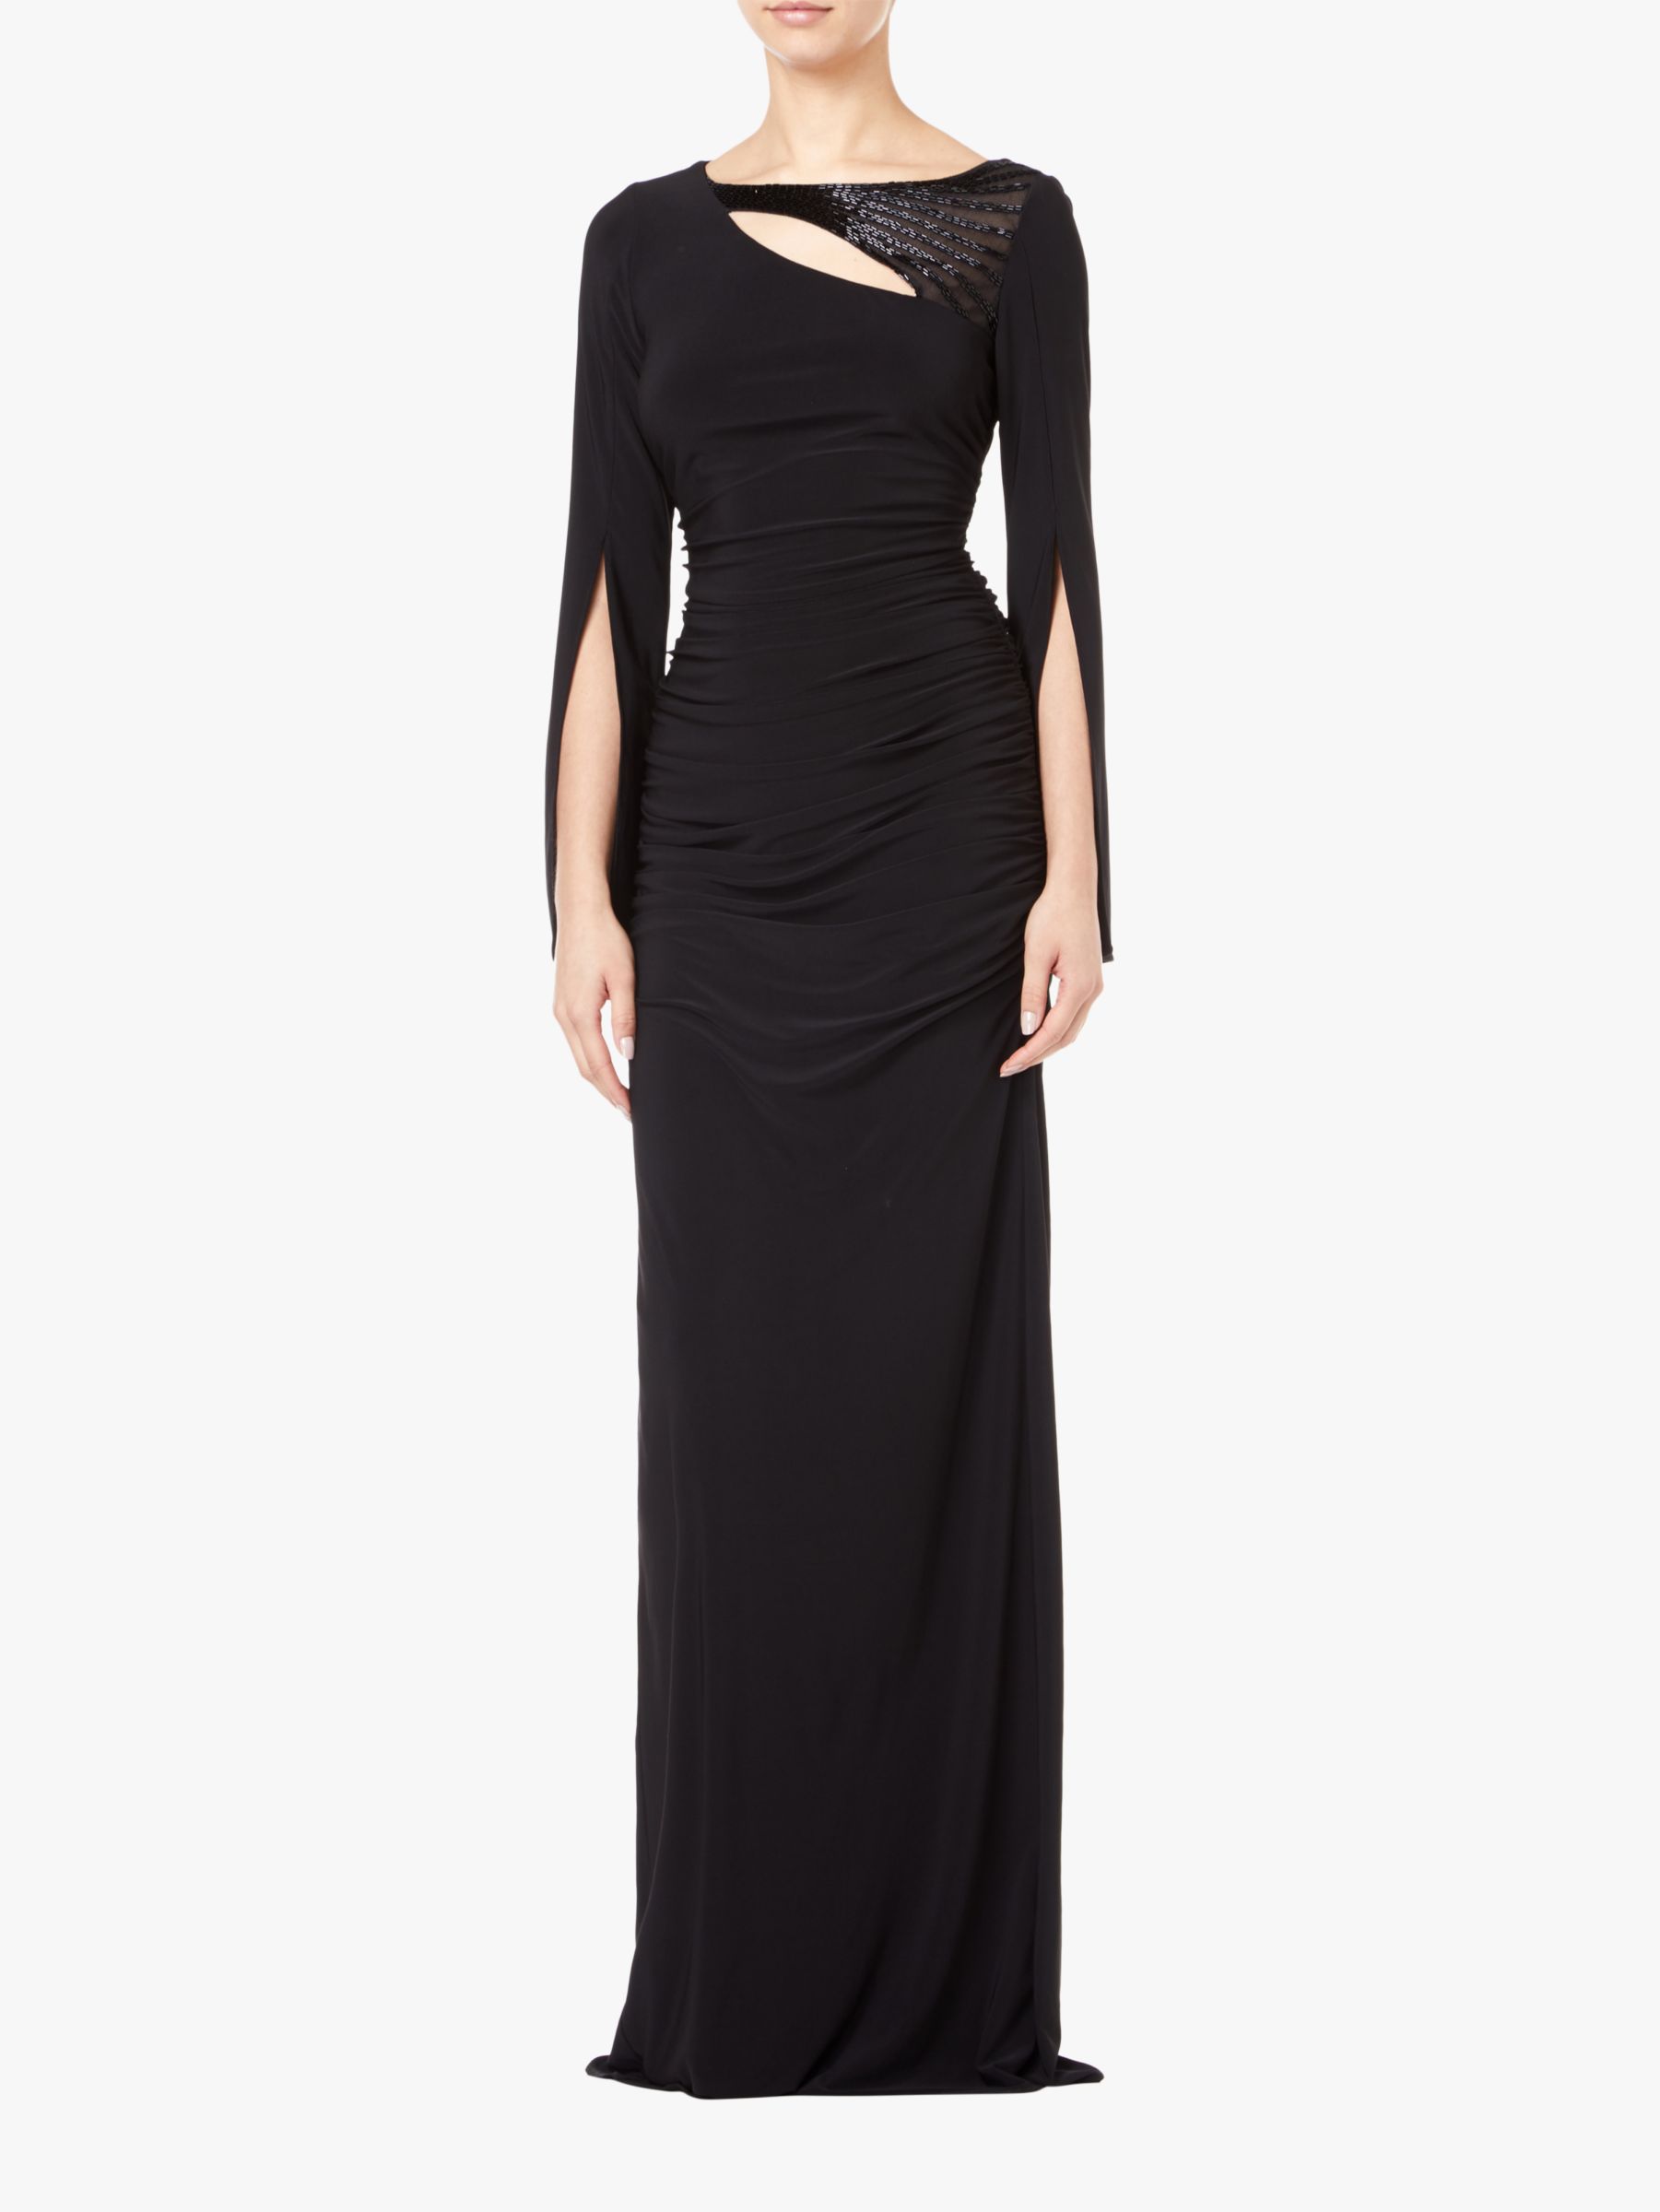 Adrianna Papell Embellished Jersey Maxi Dress, Black